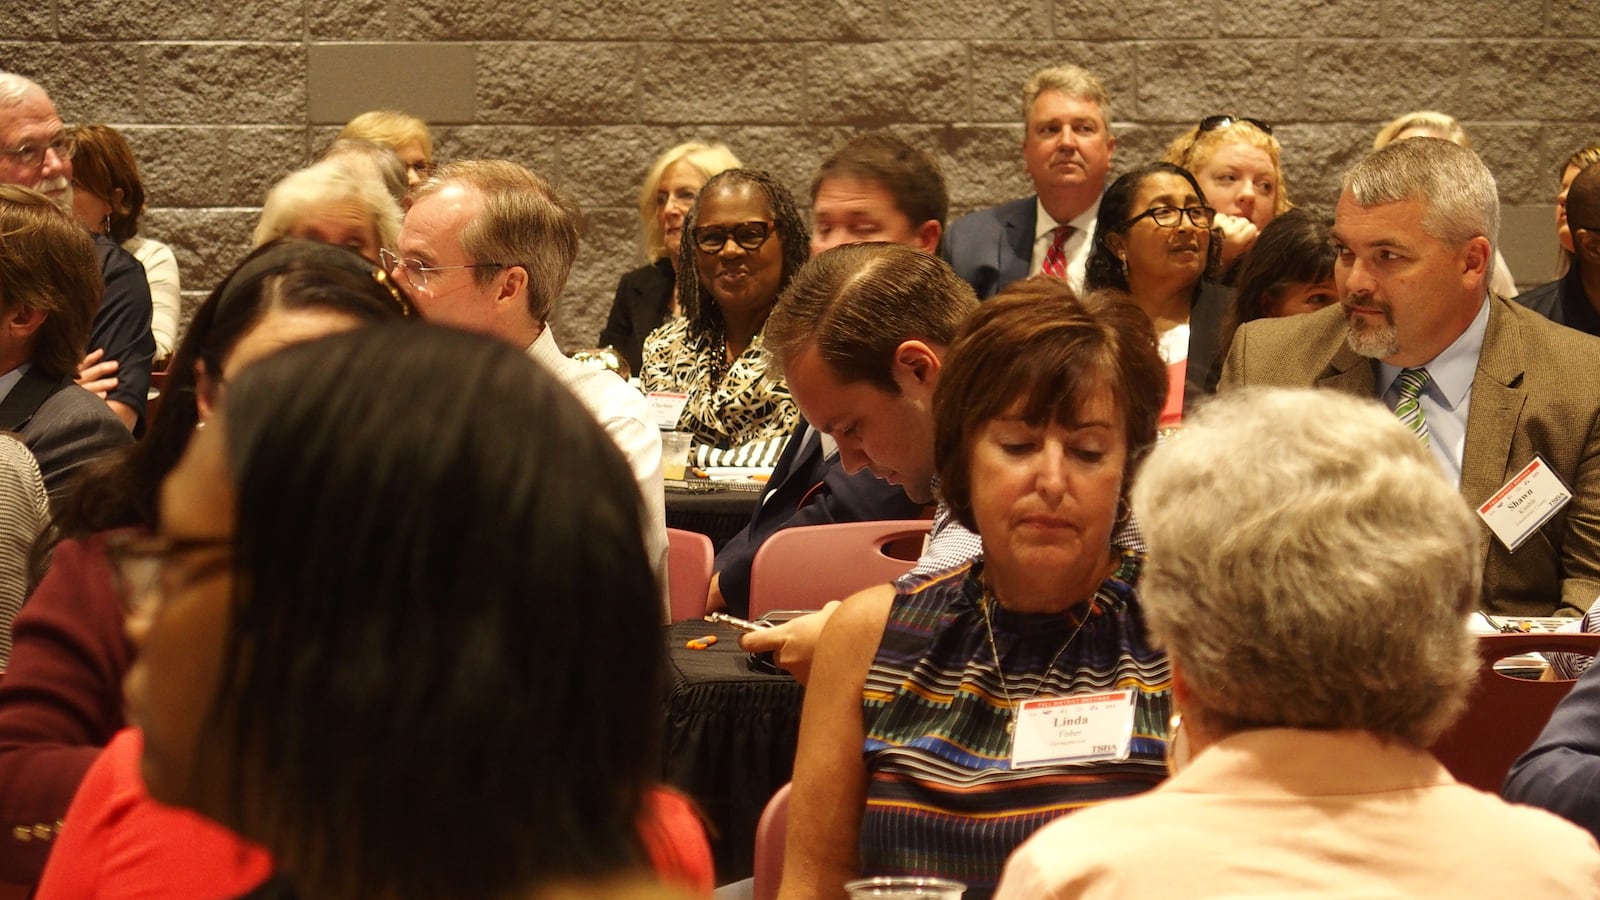 School boards from across West Tennessee gathered at the new Collierville High School on Monday evening.